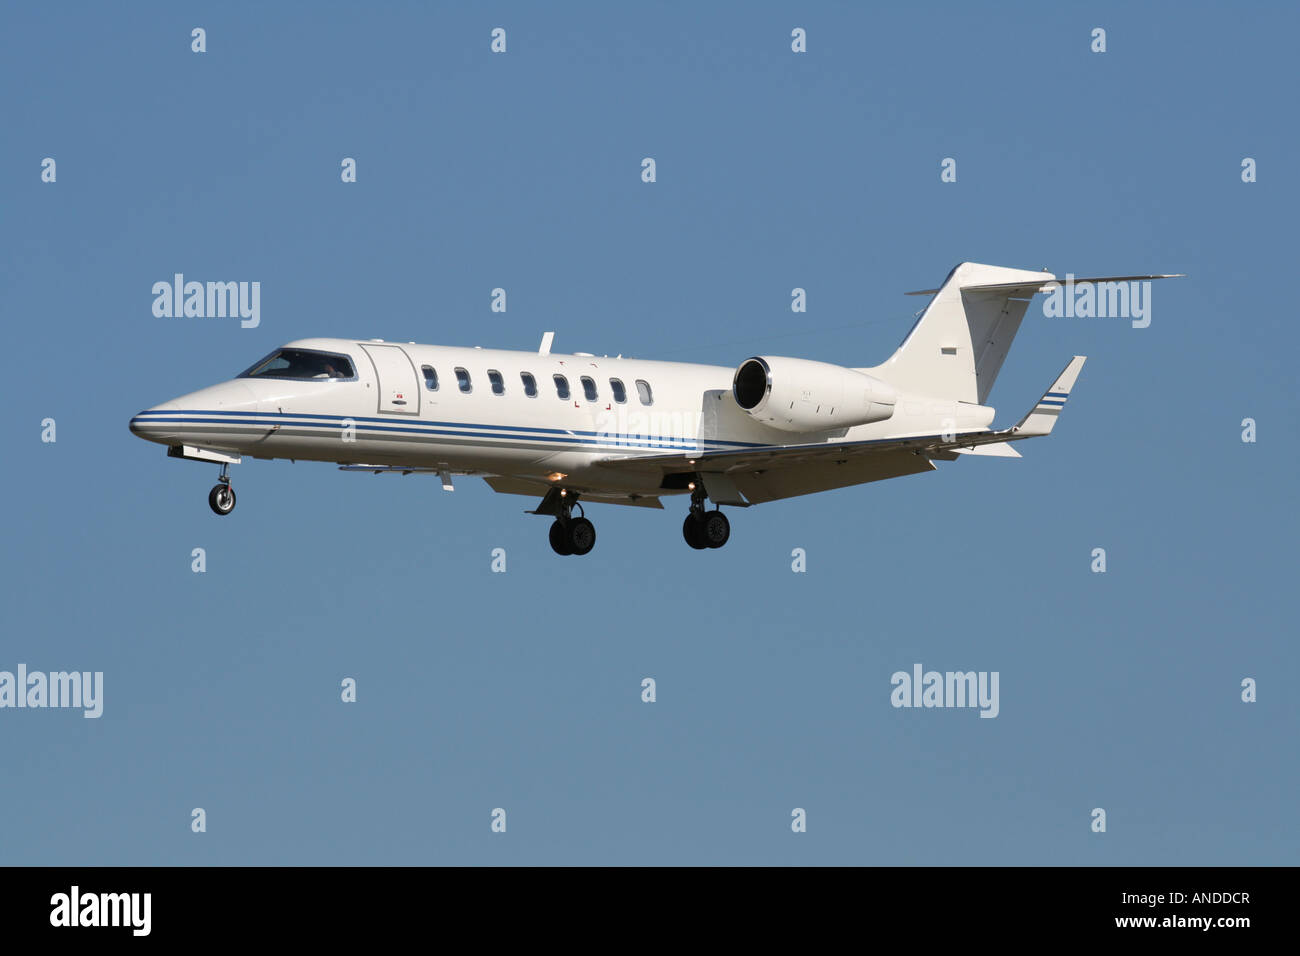 Business jet aircraft on arrival. Private aviation. Proprietary markings deleted. Stock Photo